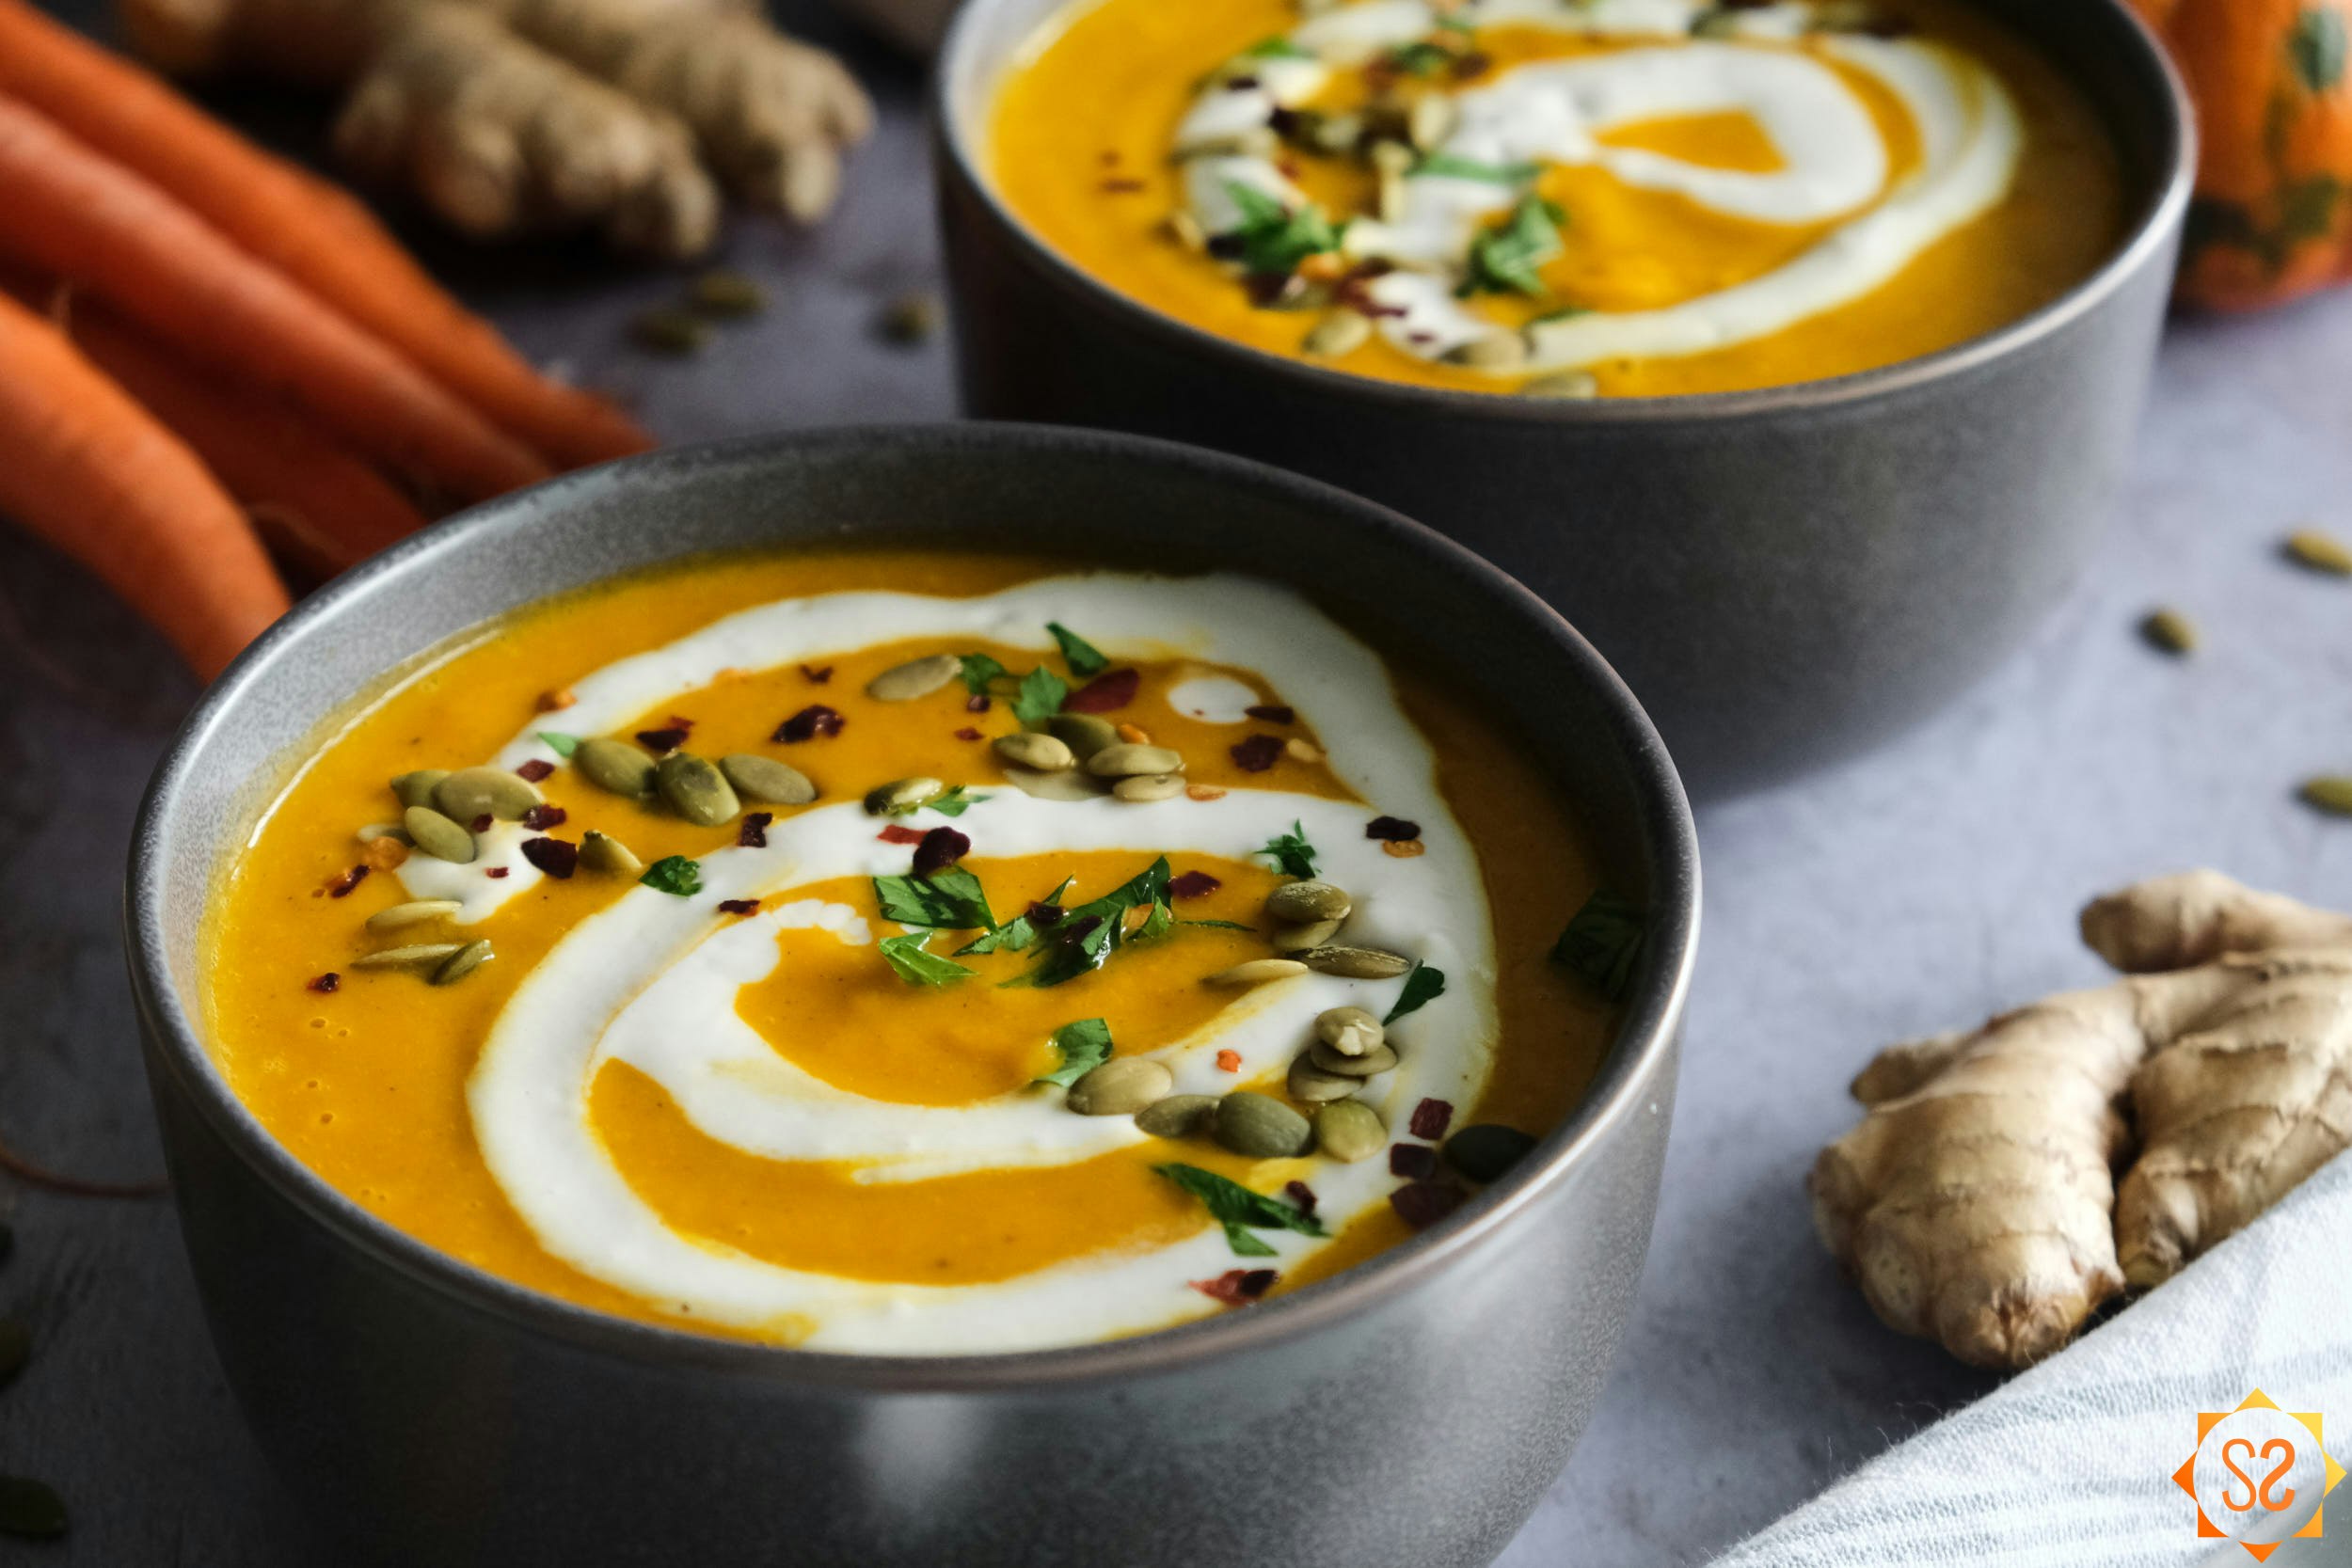 Carrot and pumpkin soup in a bowl.